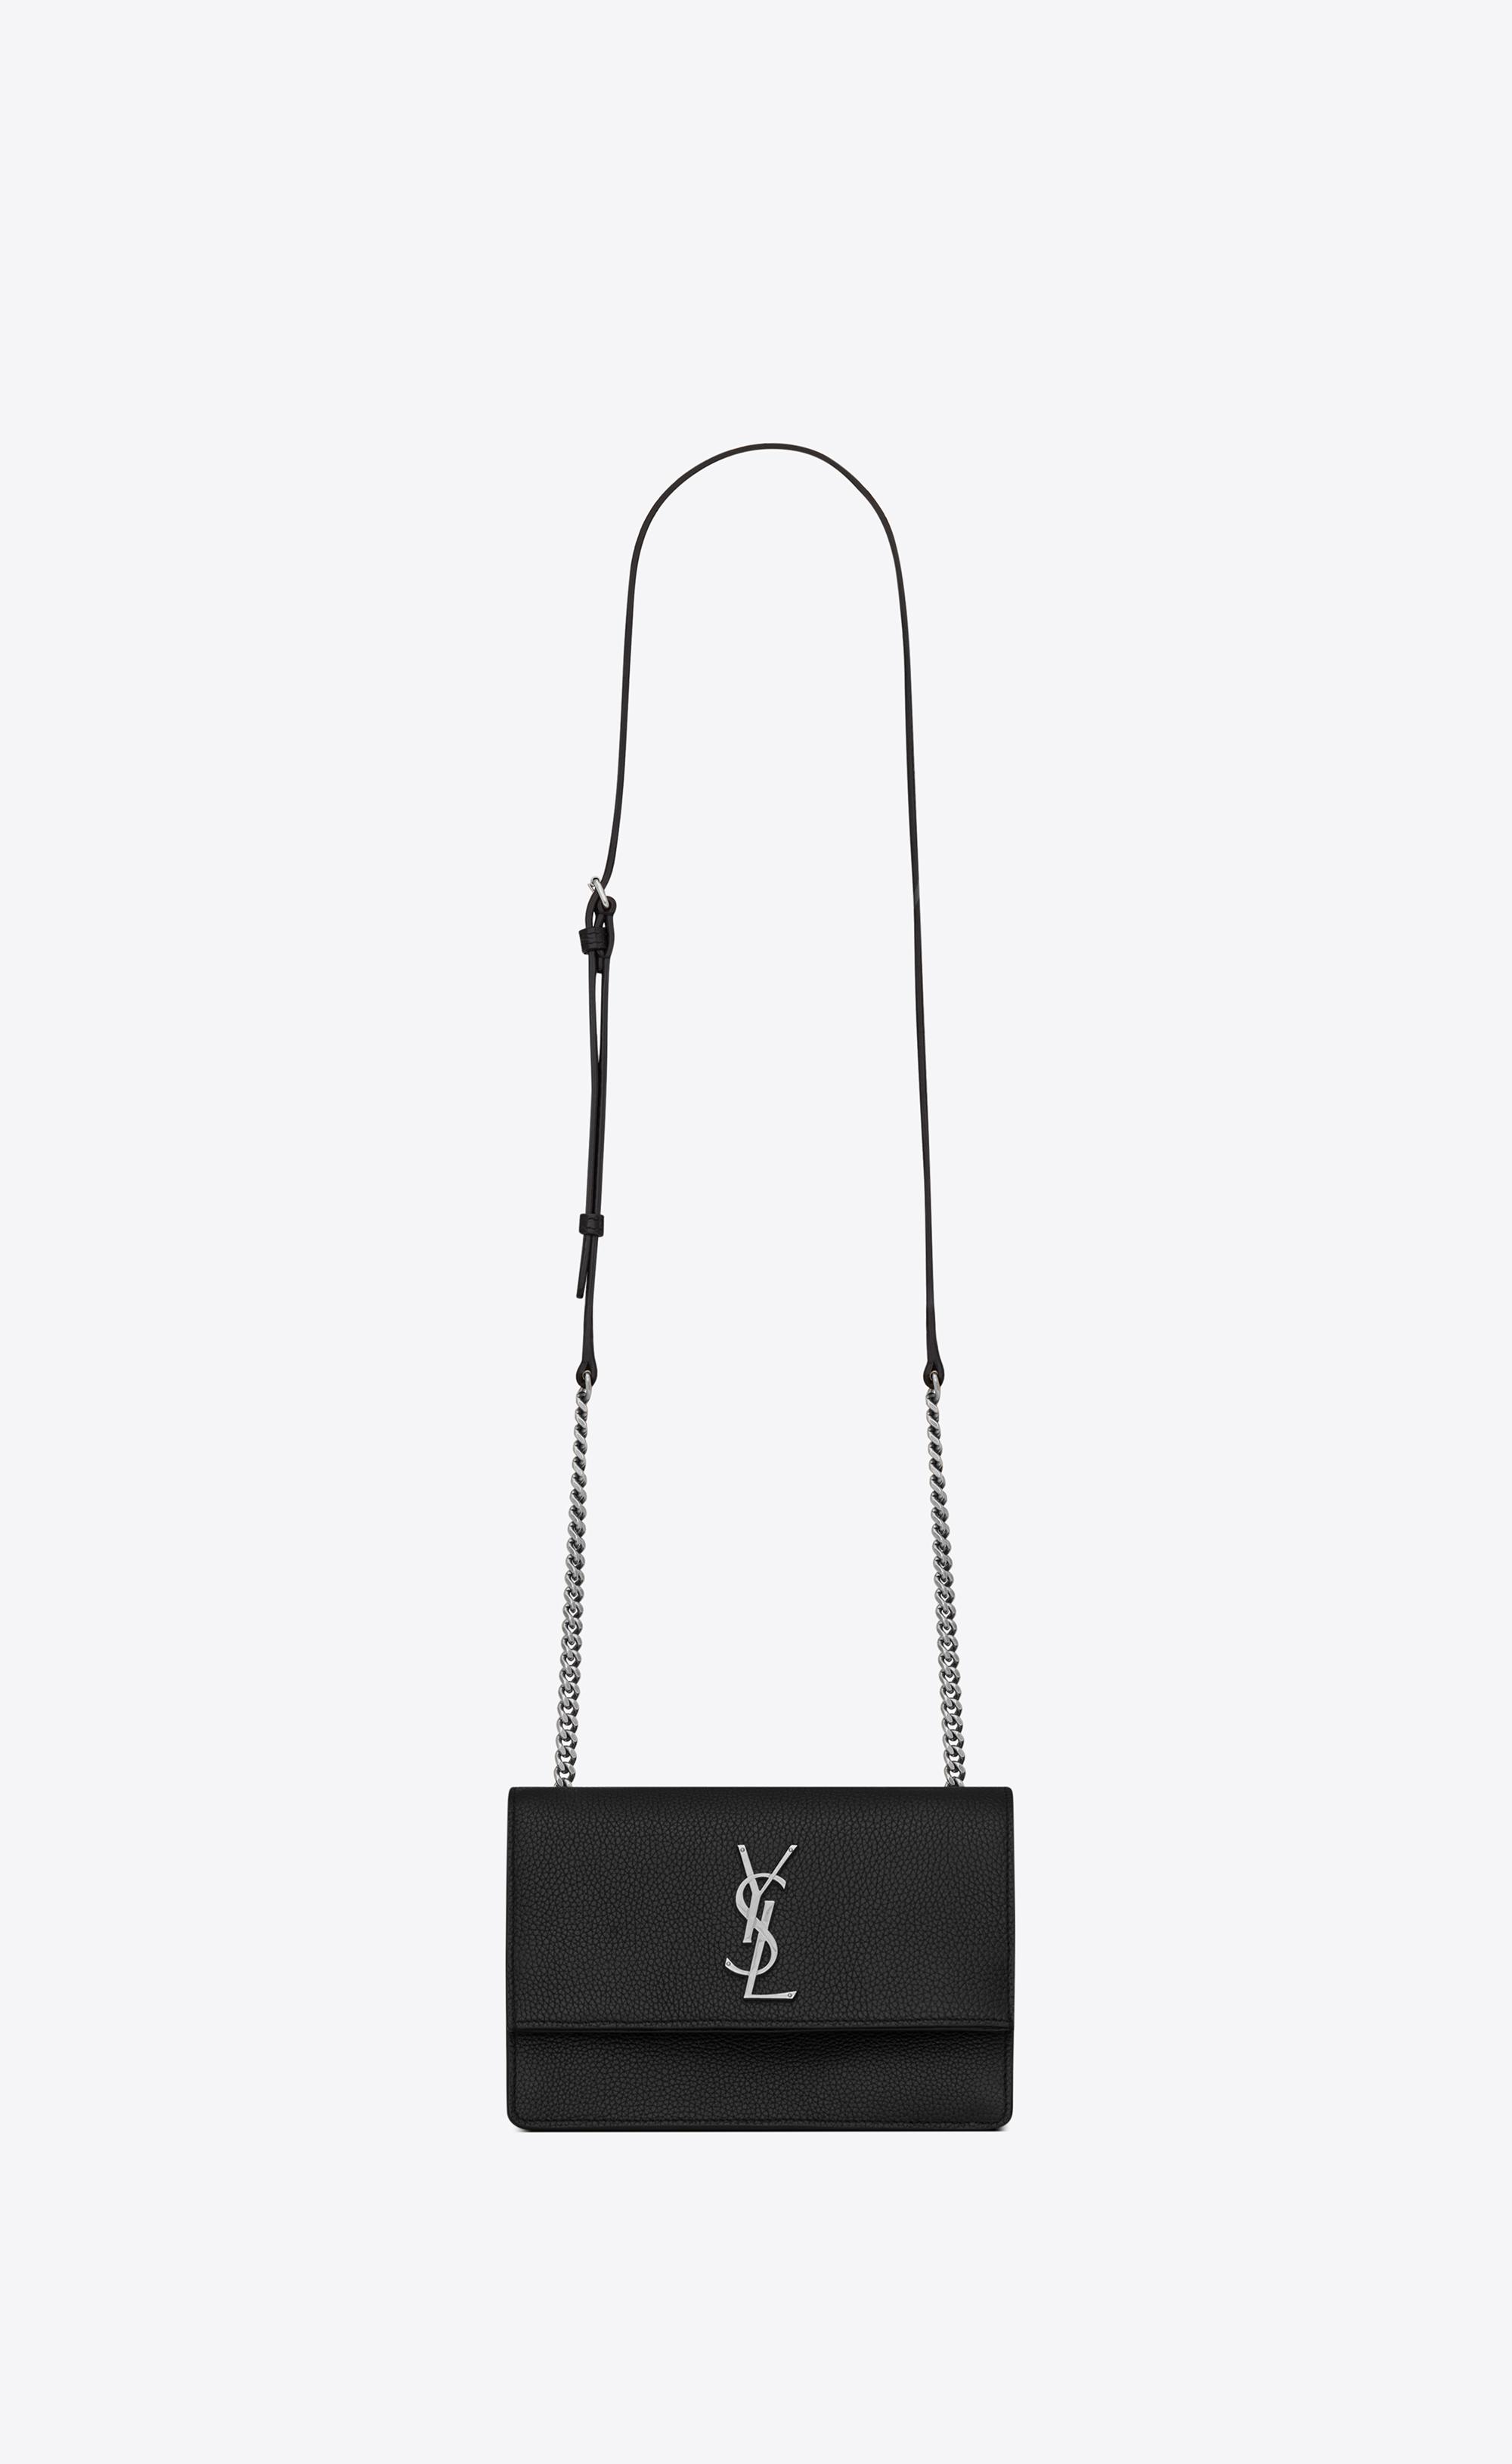 Saint Laurent Sunset Small In Grained Leather in Black - Lyst